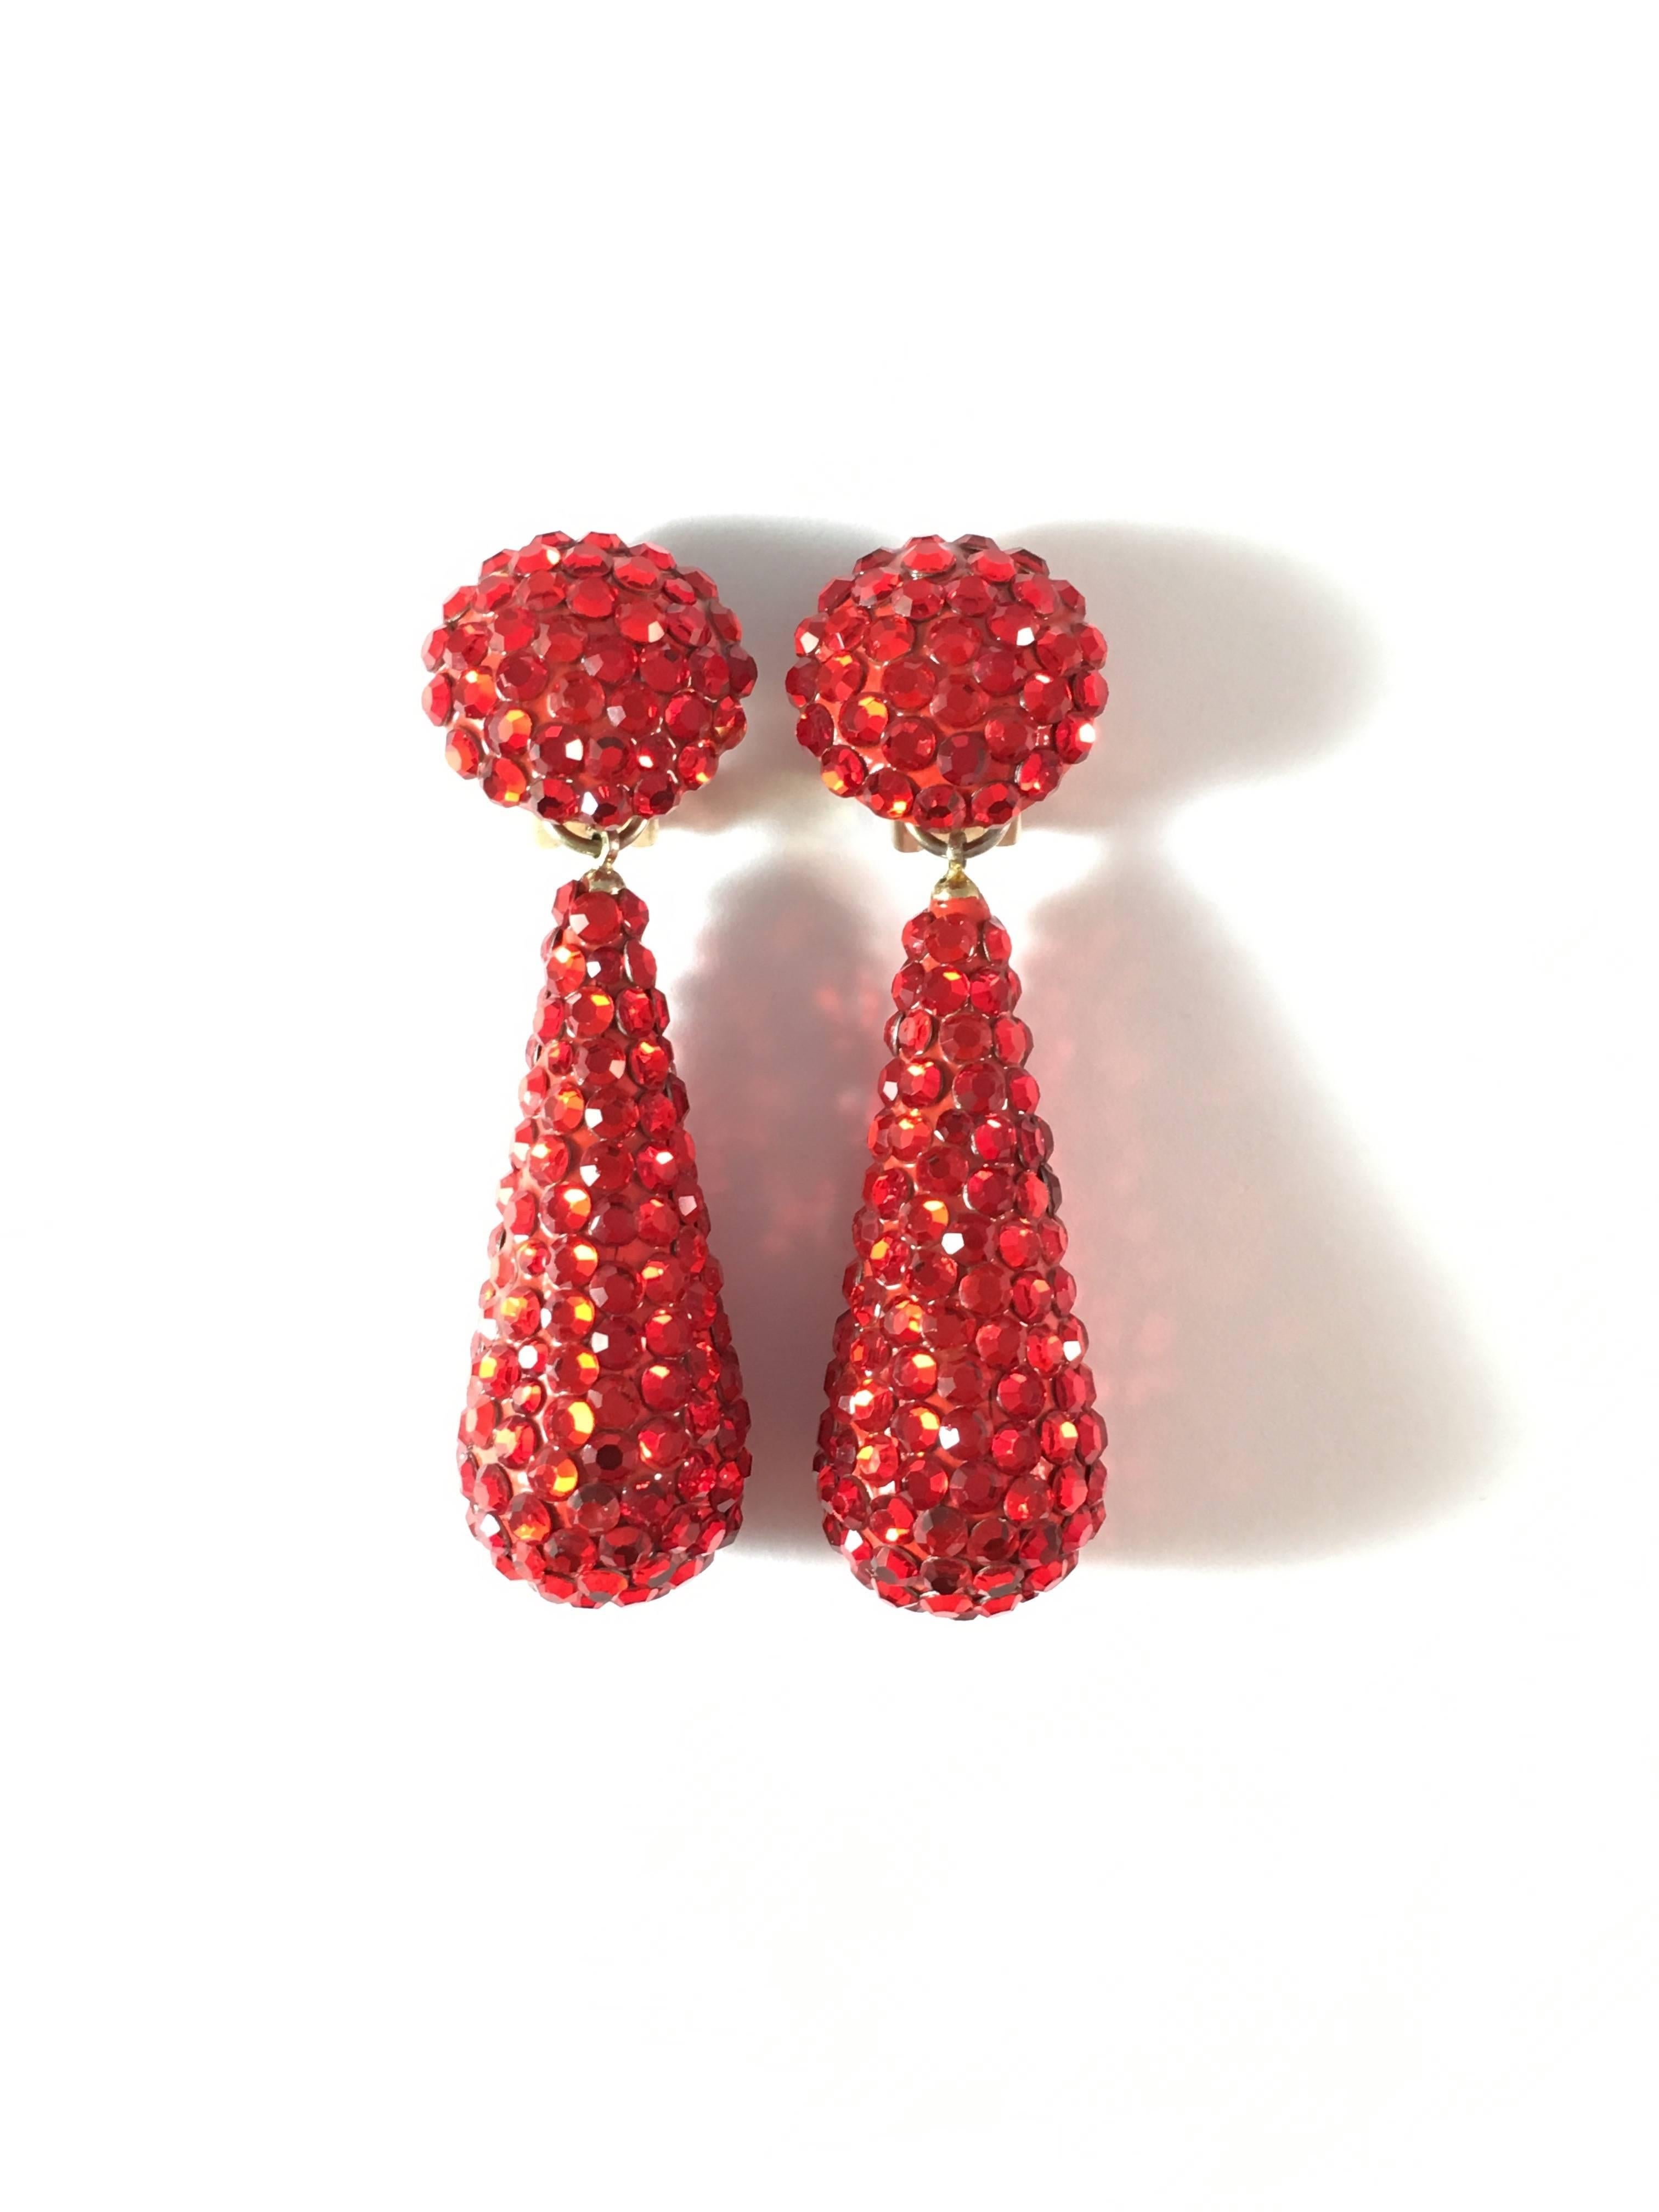 These red dangle clip-on earrings are perfect for the holidays. They were made by Richard Kerr in the 1980s and are made up of his signature pave rhinestones. They are signed 'Richard Kerr' on the back (image #5). They measure 2 1/2